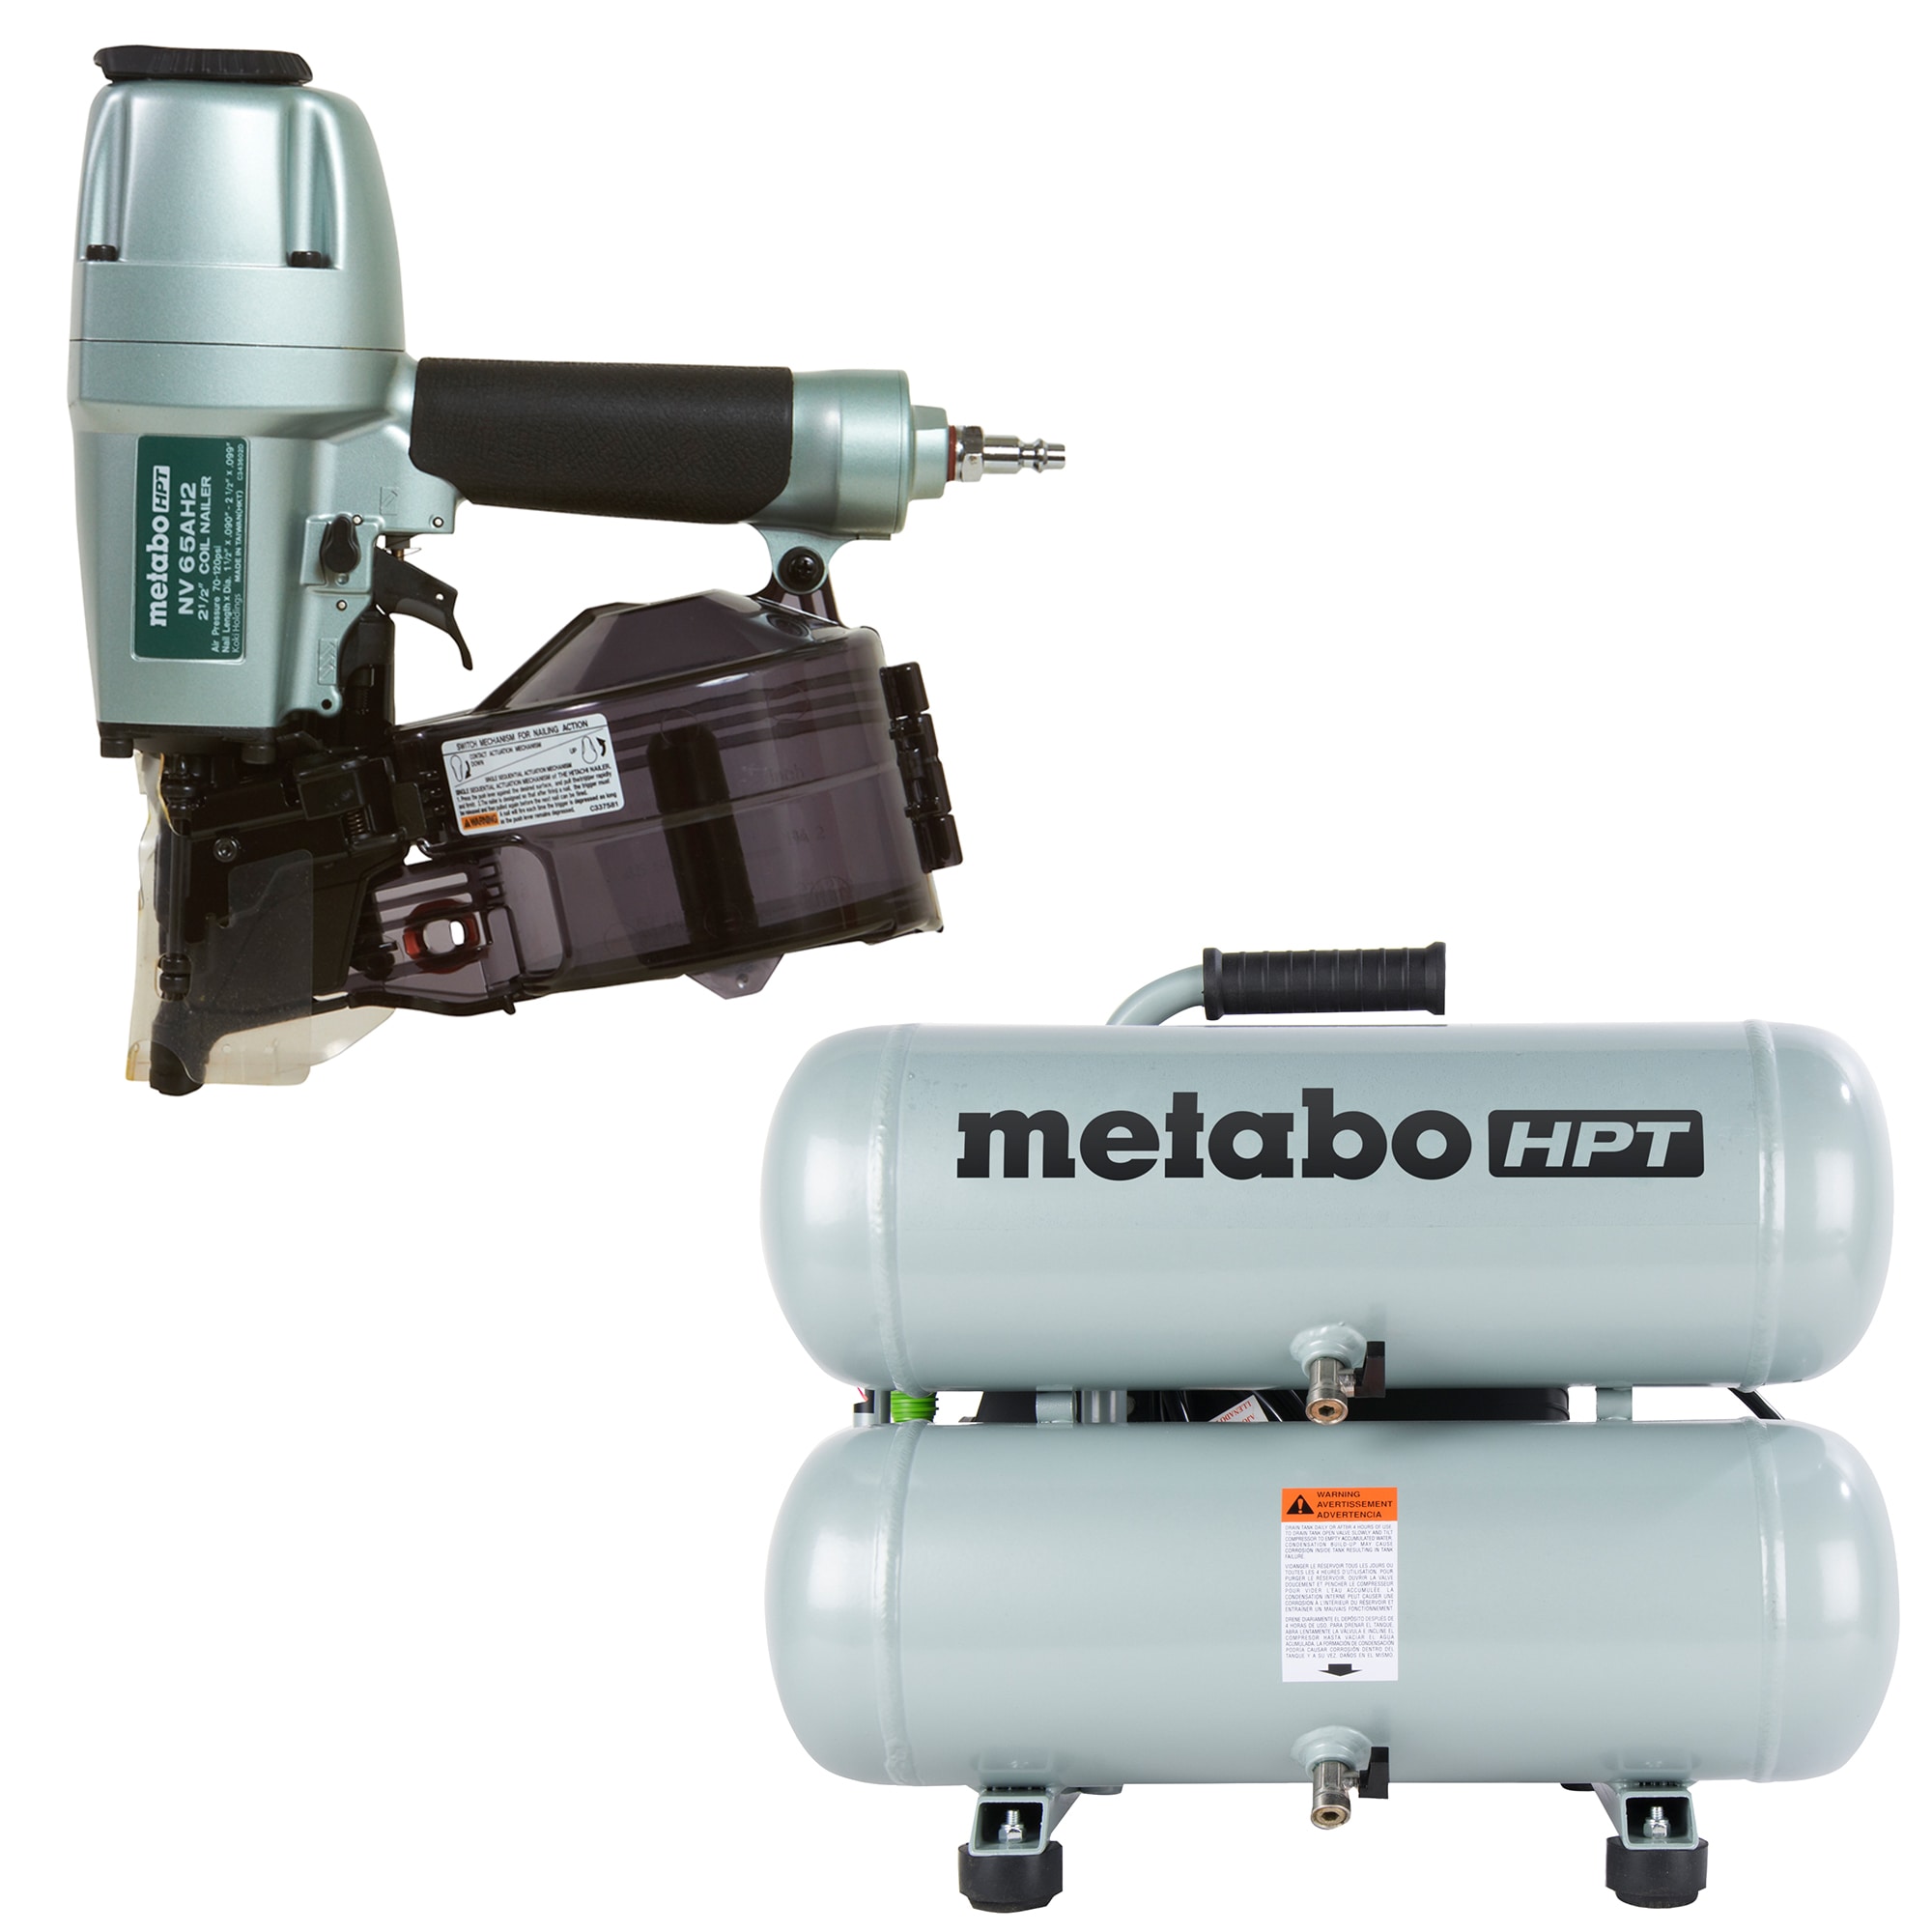 Metabo HPT 15-Degree Pneumatic Siding Nailer with 4-Gallon Single Stage Portable Electric Twin Stack Air Compressor